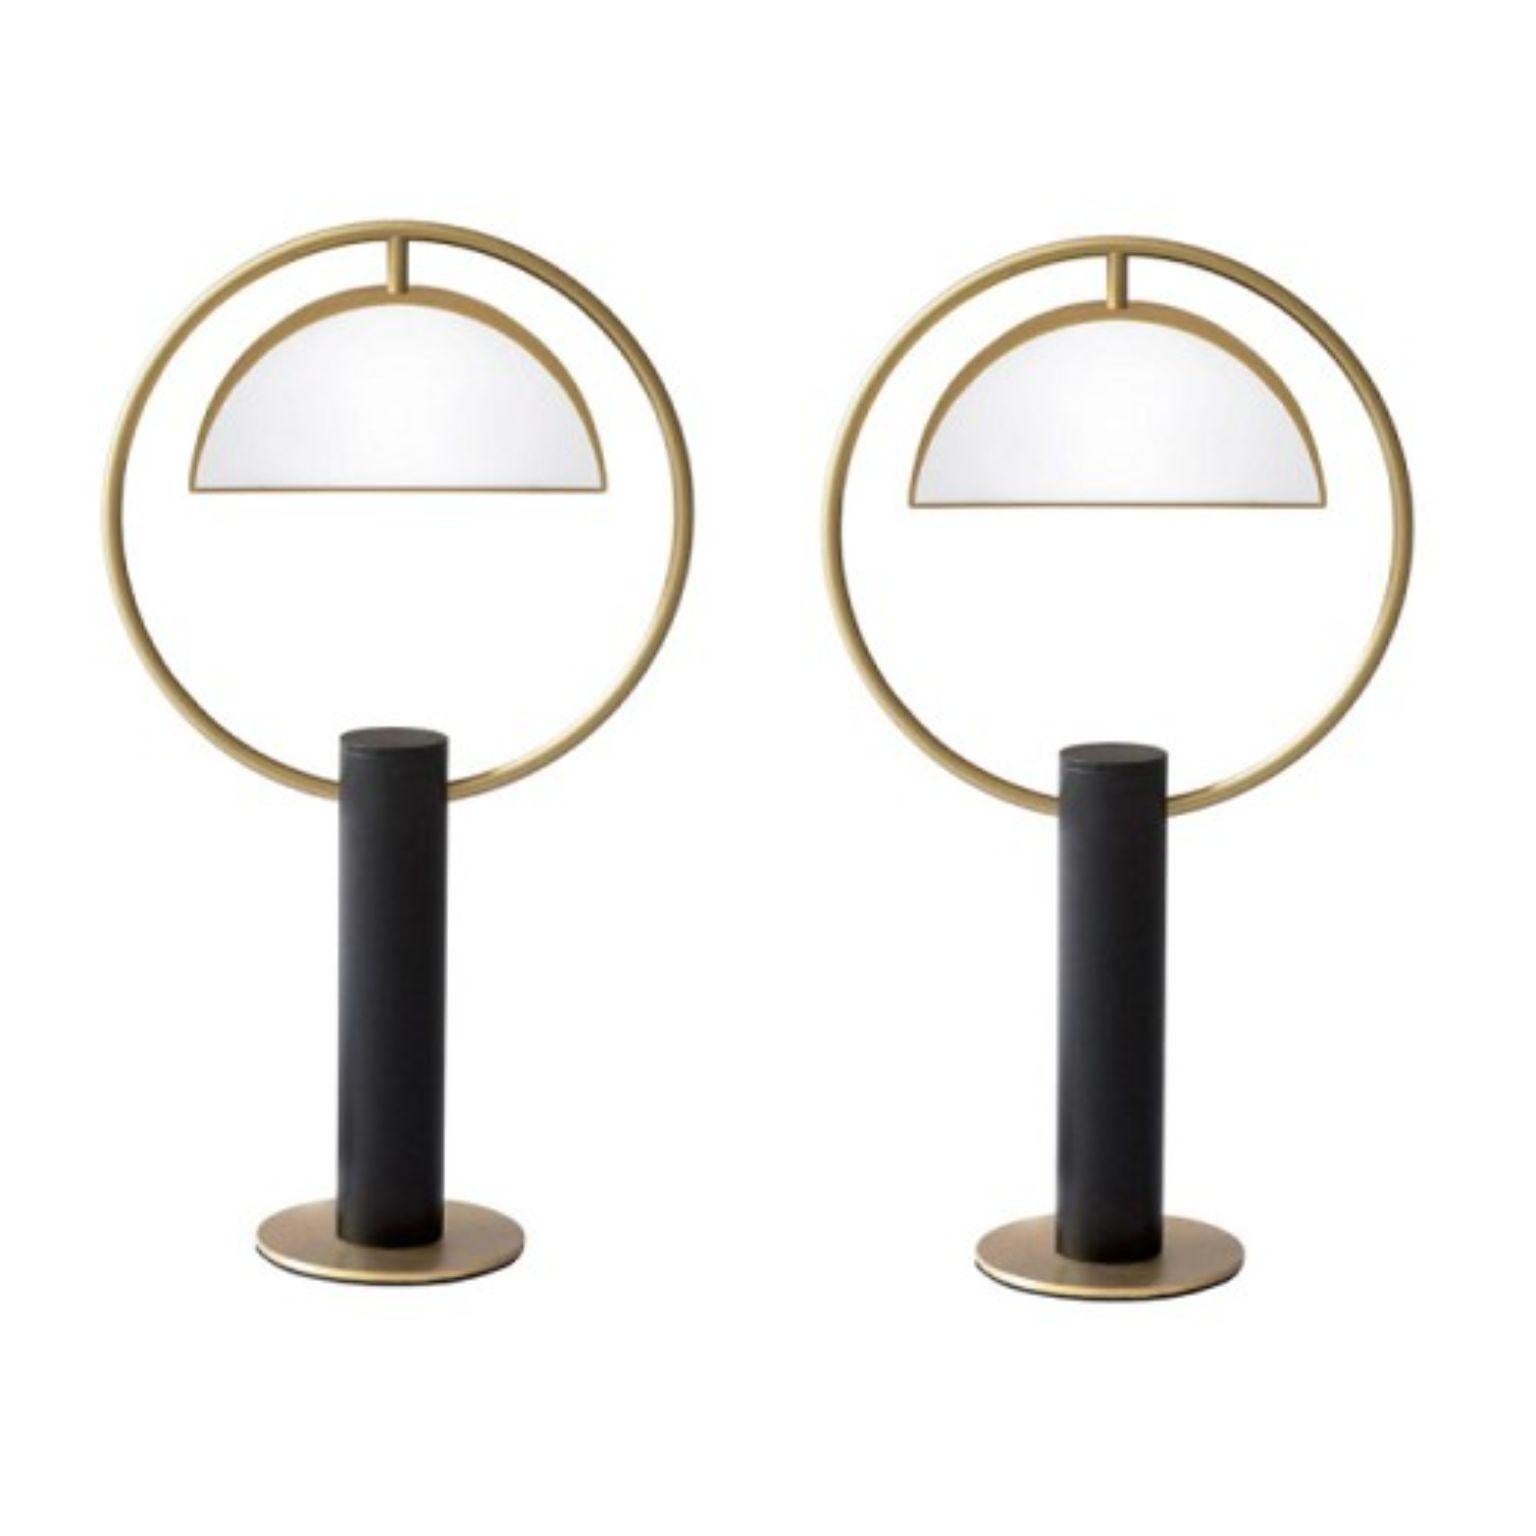 Set of 2 brass half in circle table lamps by Square in Circle
Dimensions: H 55 x W 30 x D 5 cm
Materials: Brushed brass finish, white frosted glass, dark grey metal  

Inspired by costume design from the Triadic Ballet by Oscar Schlemmer,